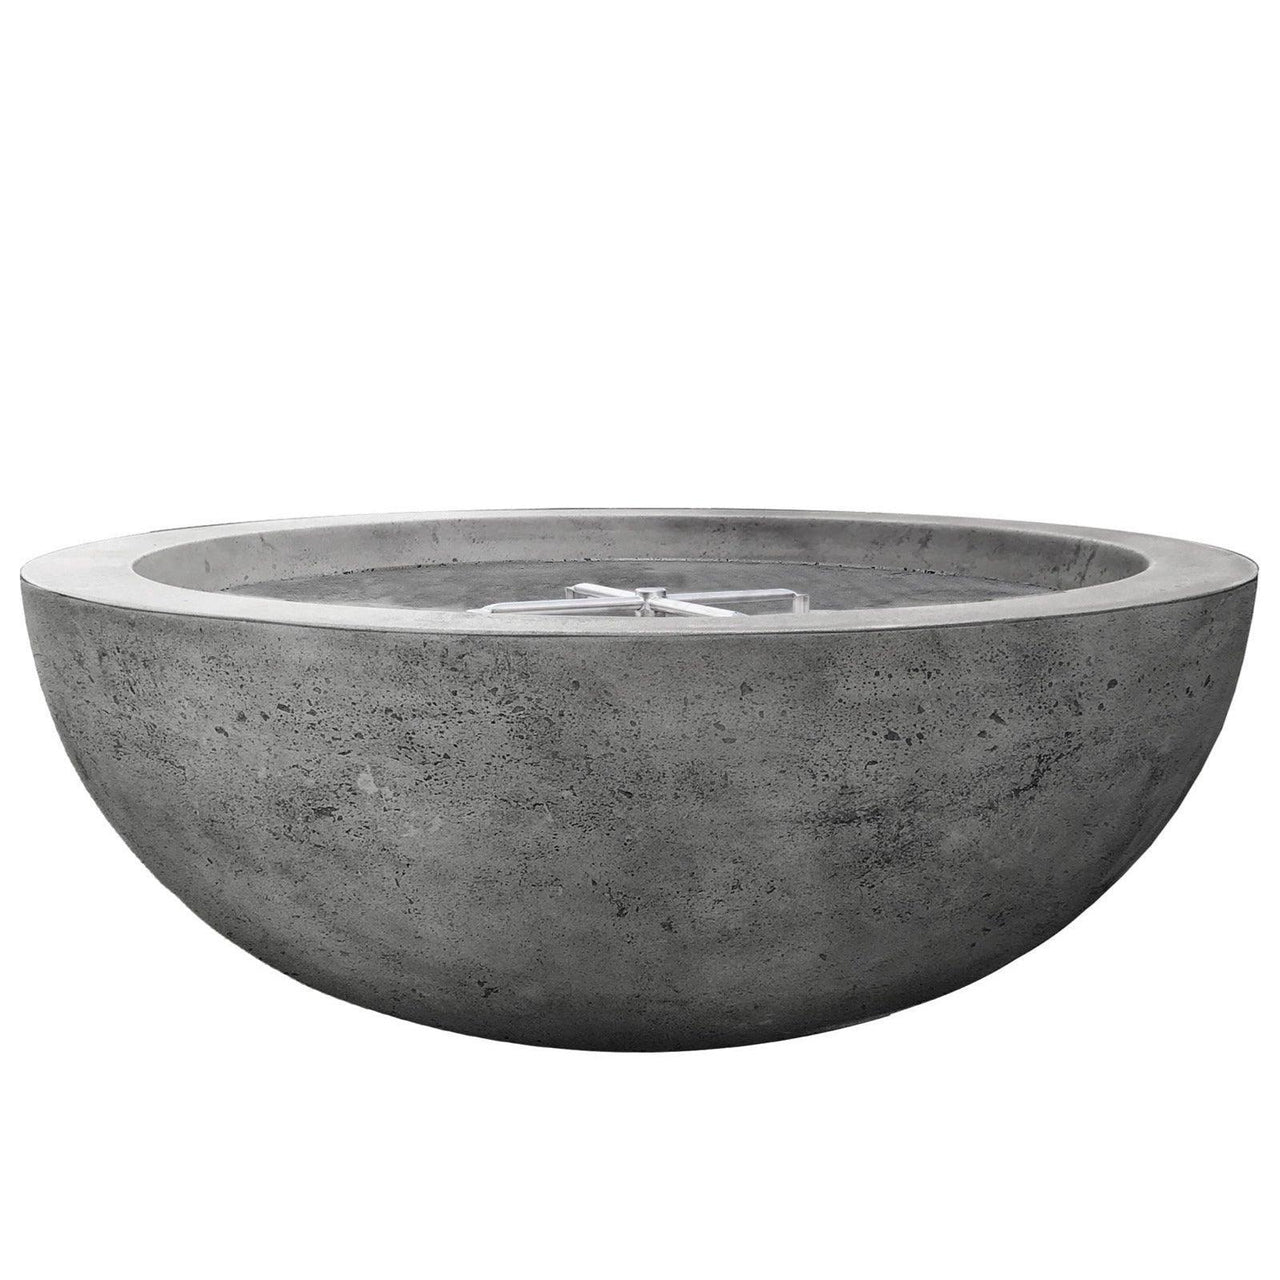 Prism Hardscapes - Moderno Series 4 Round Concrete Fire Bowl - Fire Pit Stock